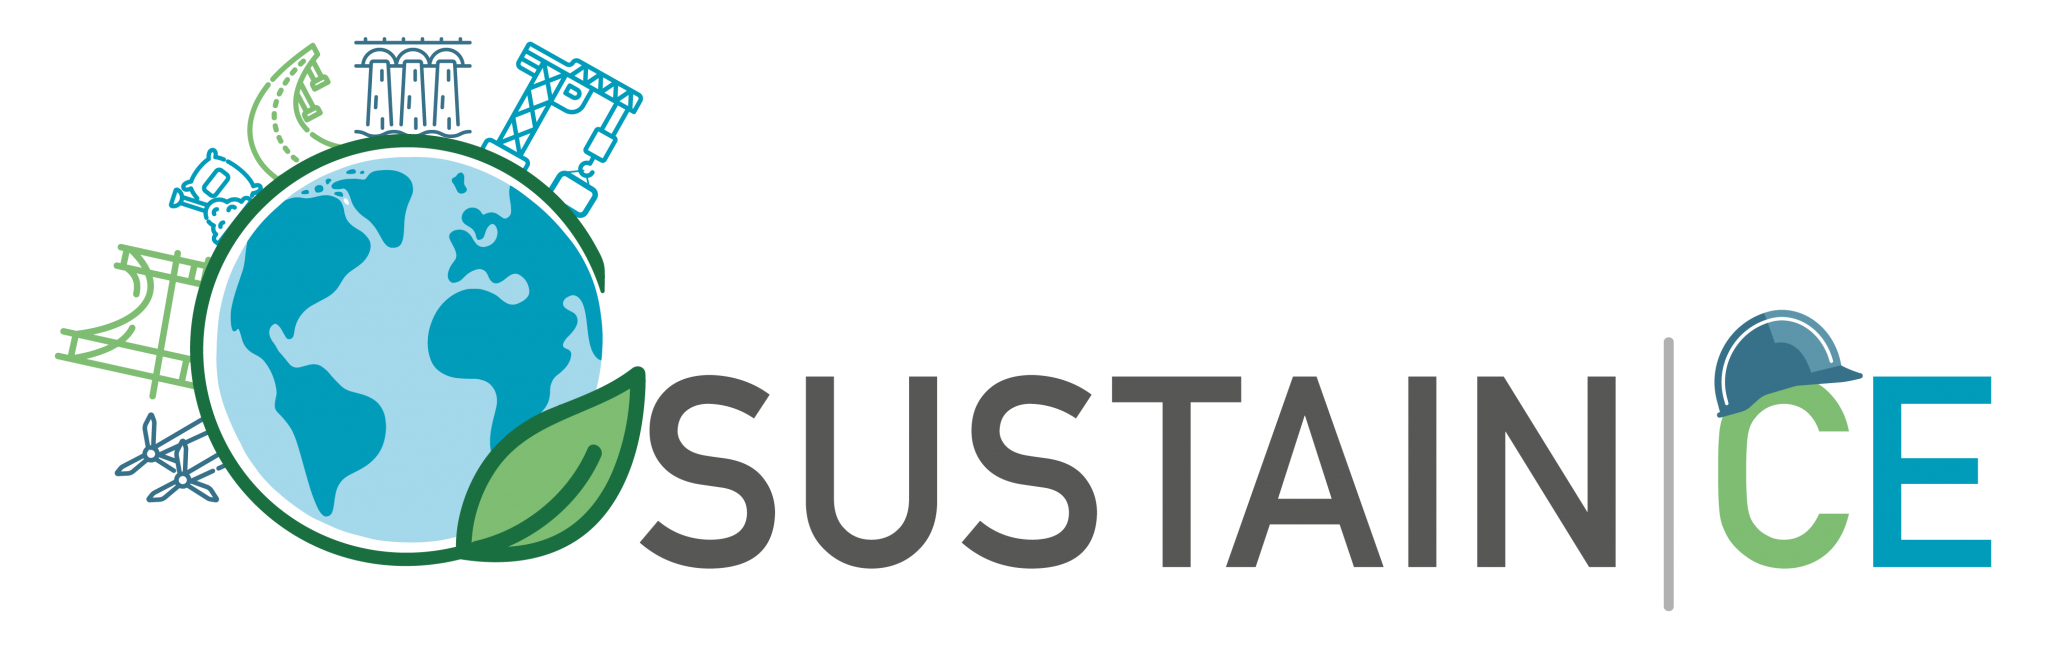 SUSTAIN-CE Project: Newsletter #5